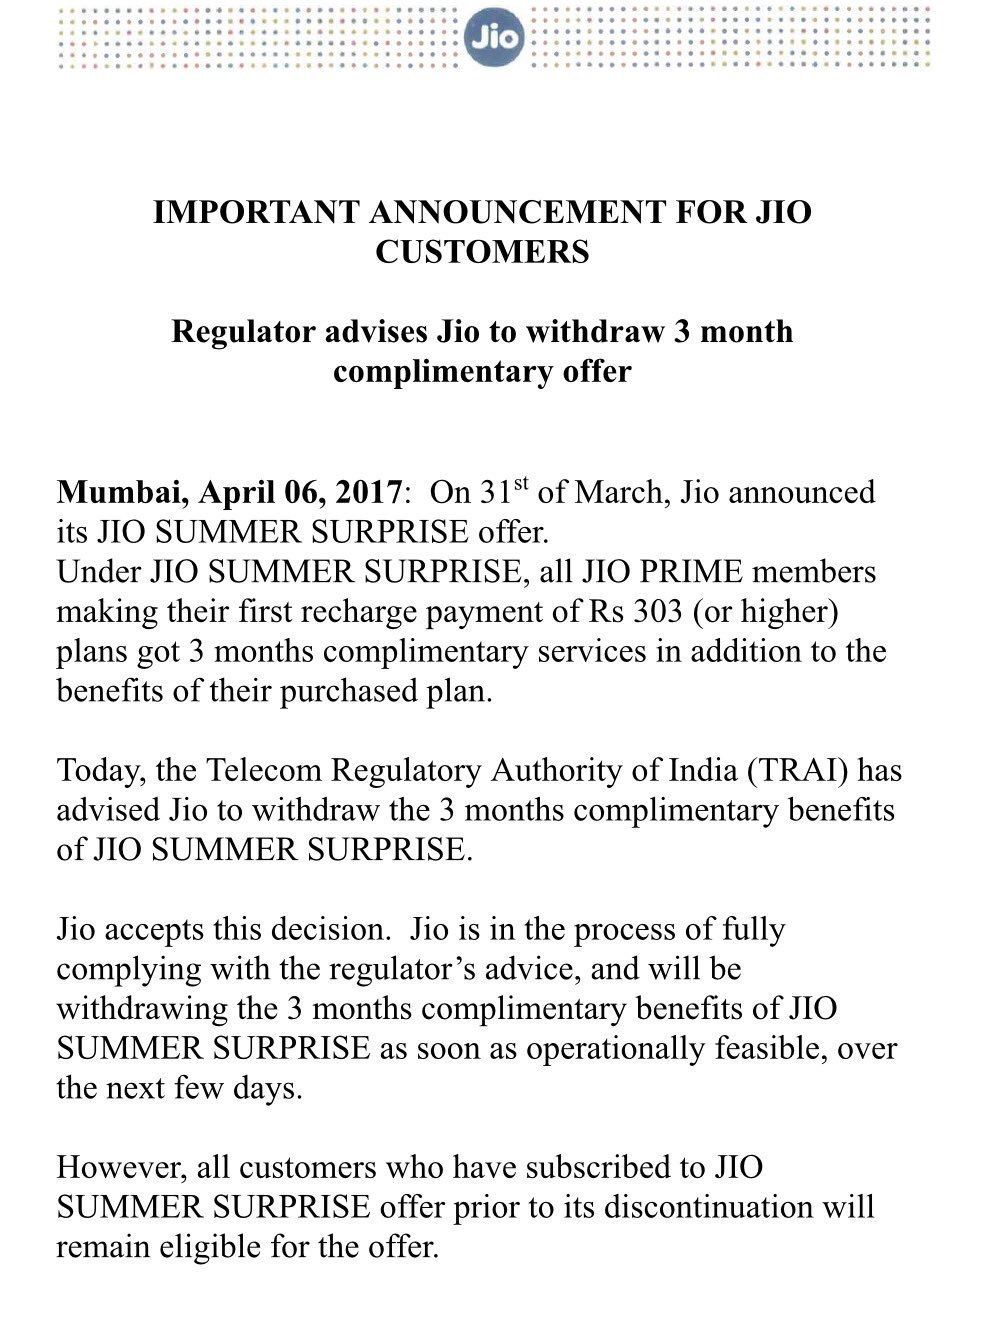 Jio Withdraws Summer Surprise Offer